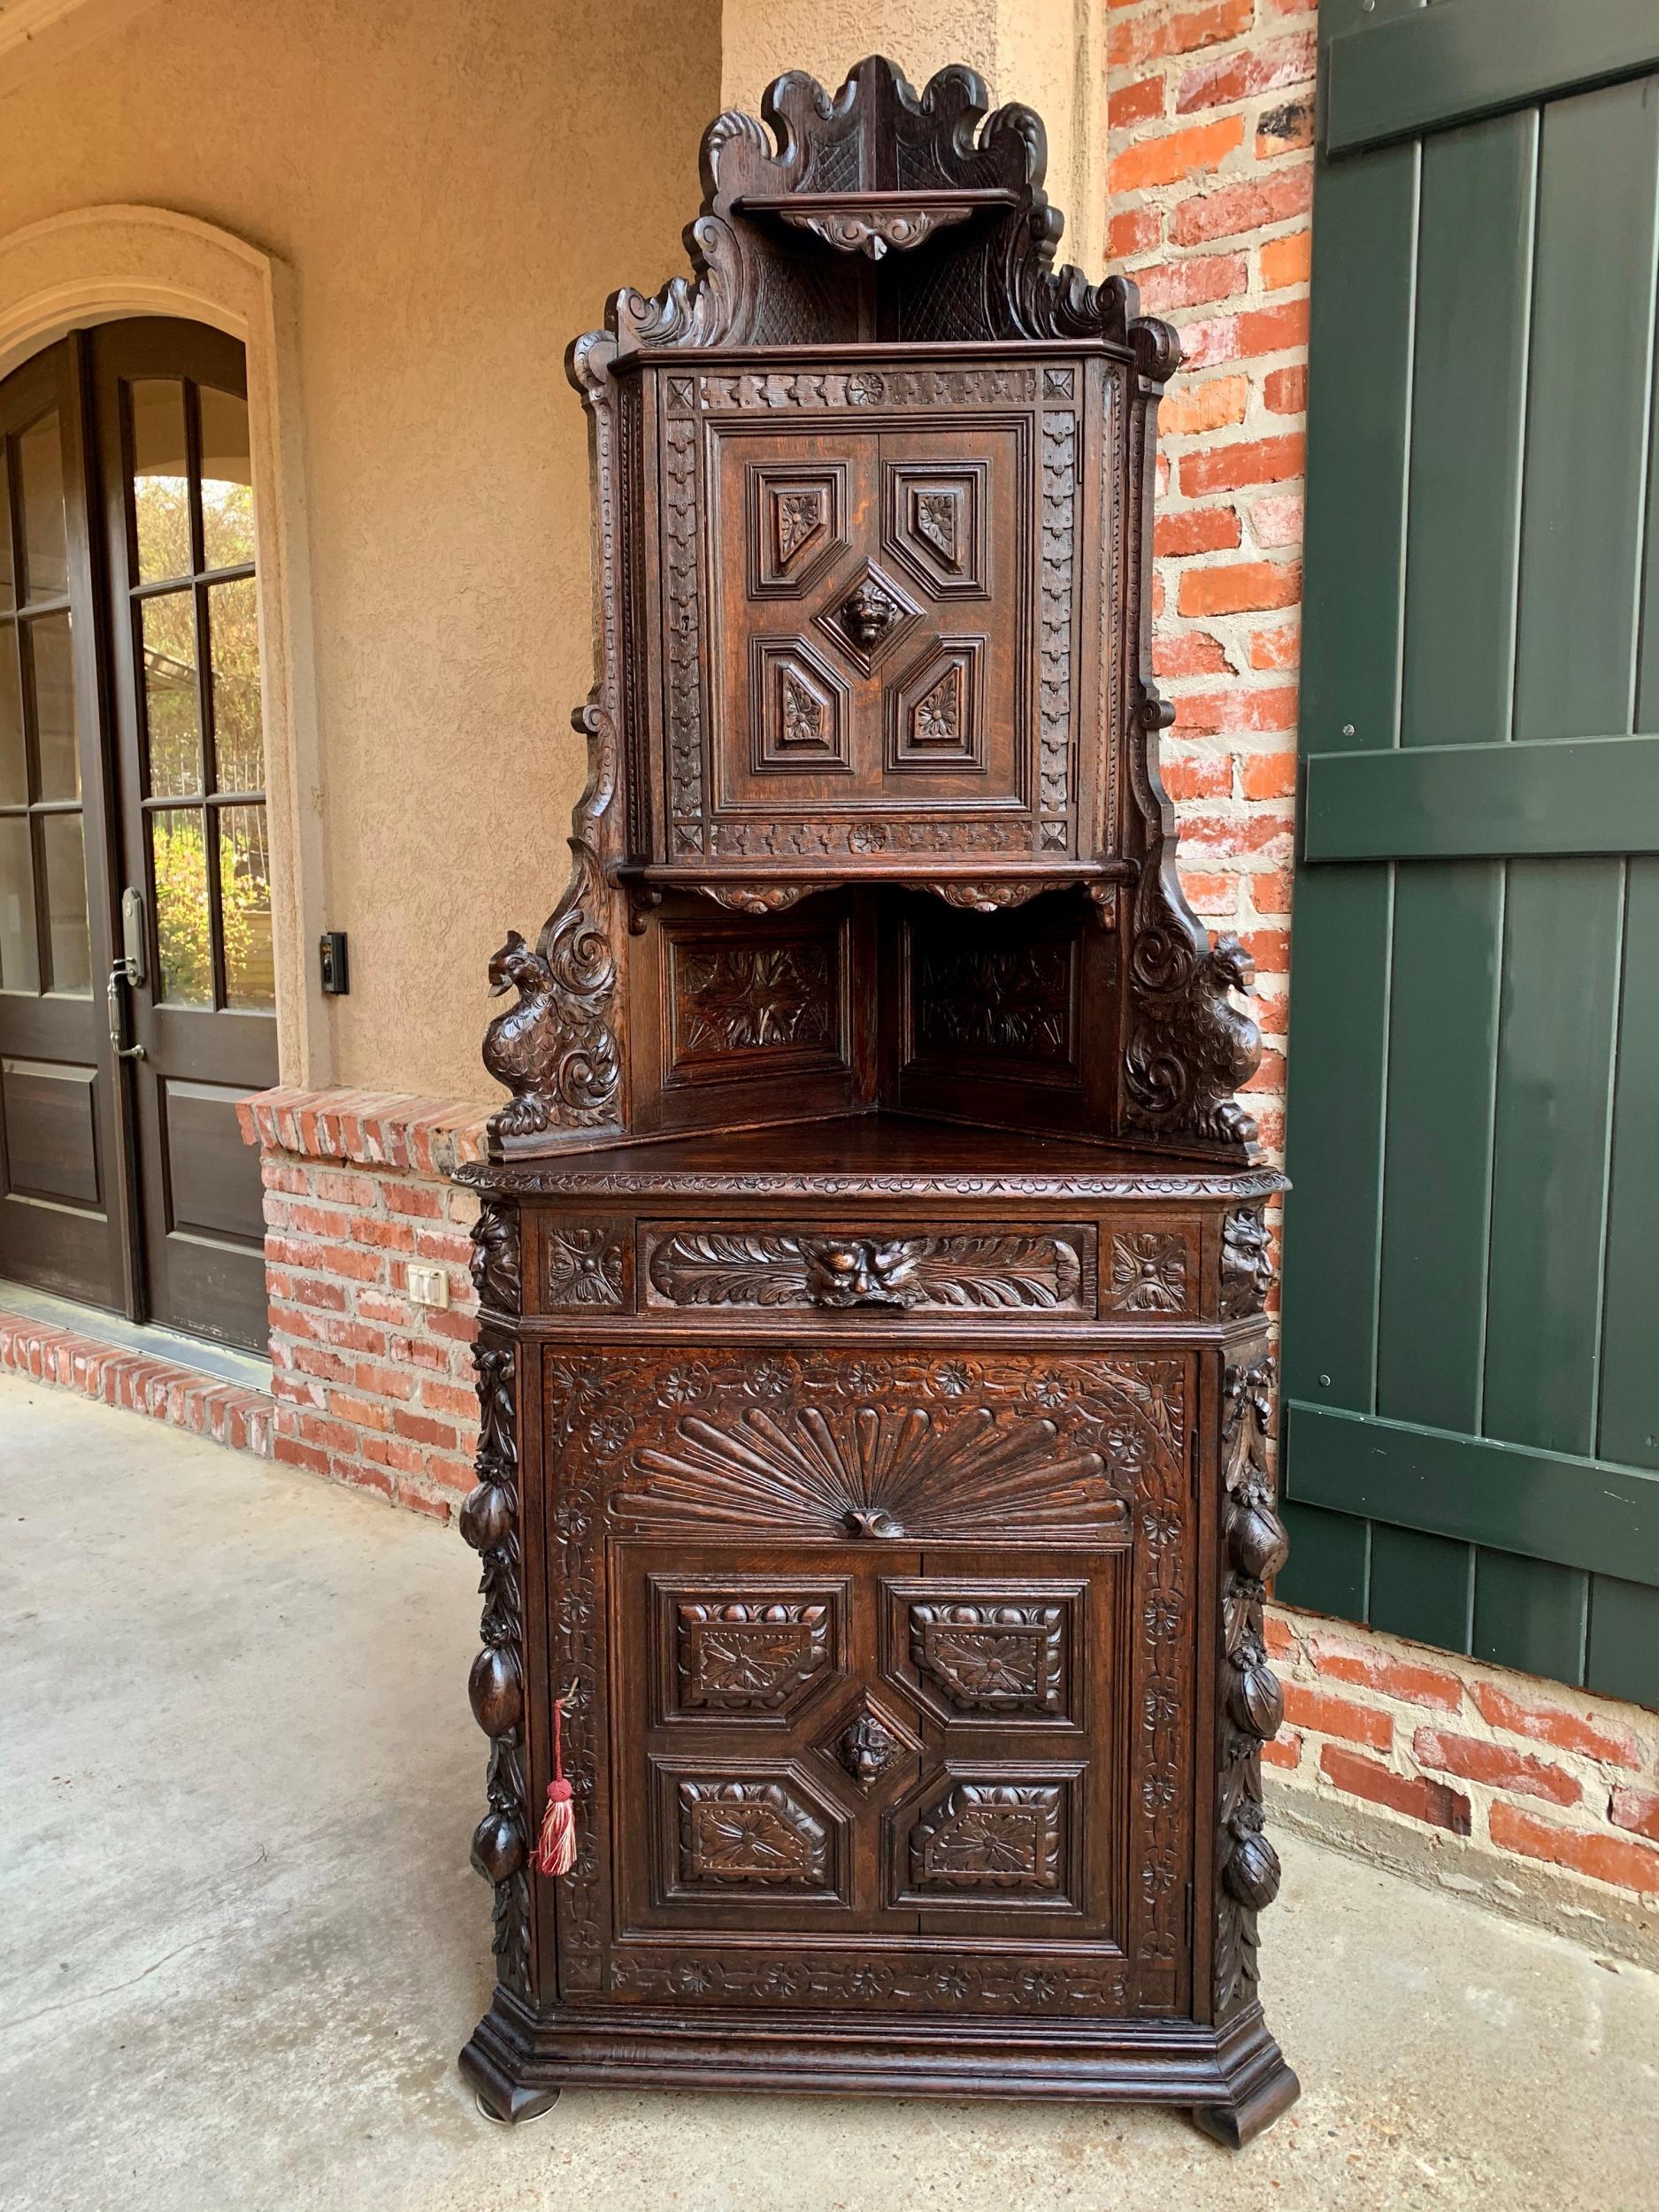 Antique French corner cabinet bookcase carved oak black forest renaissance

~Direct from France~
~Majestic antique French corner cabinet with gorgeous, ornate upper cabinet~
~Upper cabinet features carved scalloped sides with two level upper